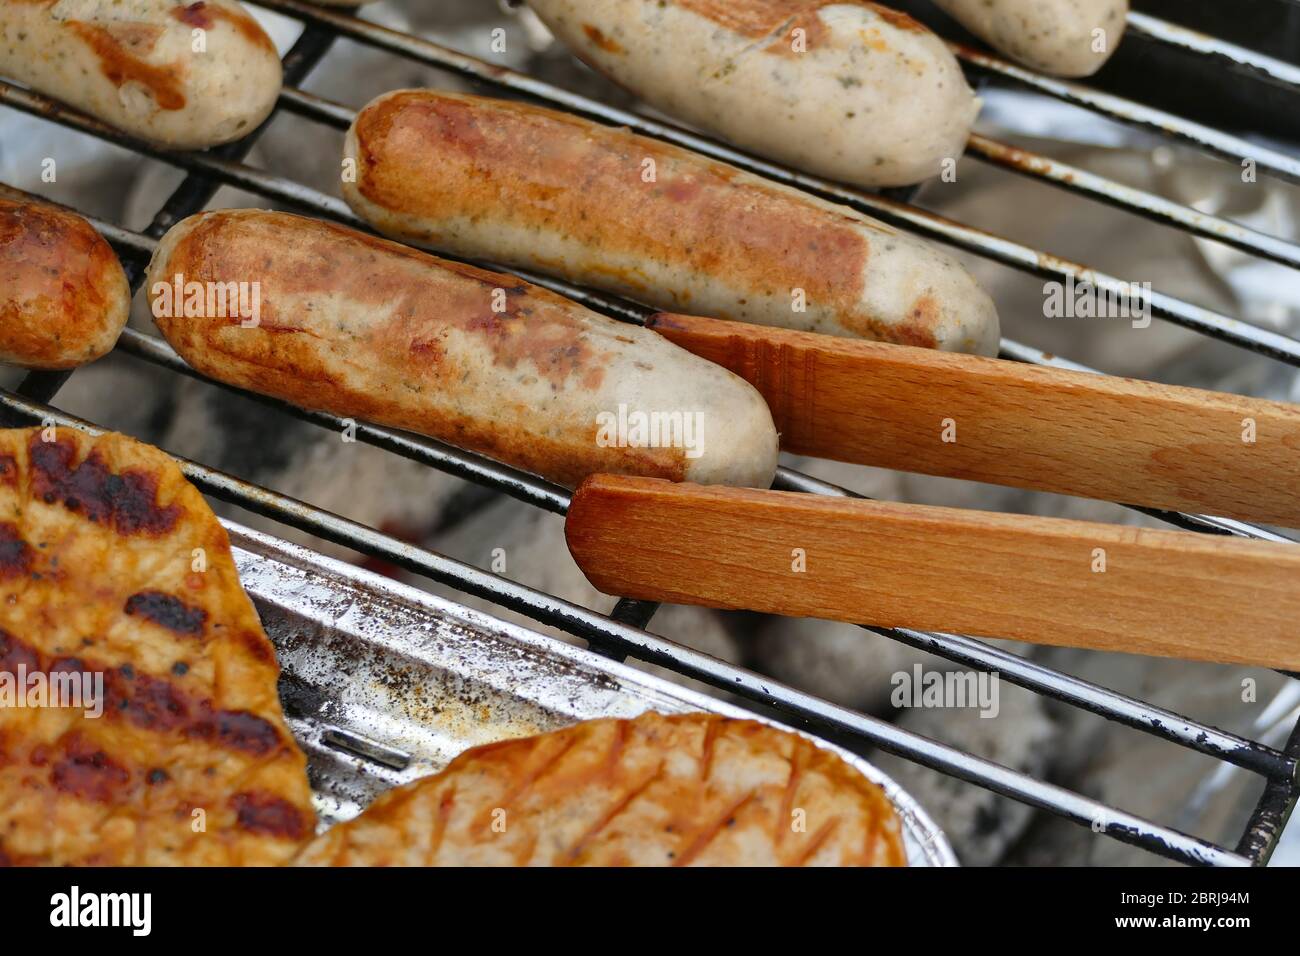 Delicious grilled sausage in summertime Stock Photo